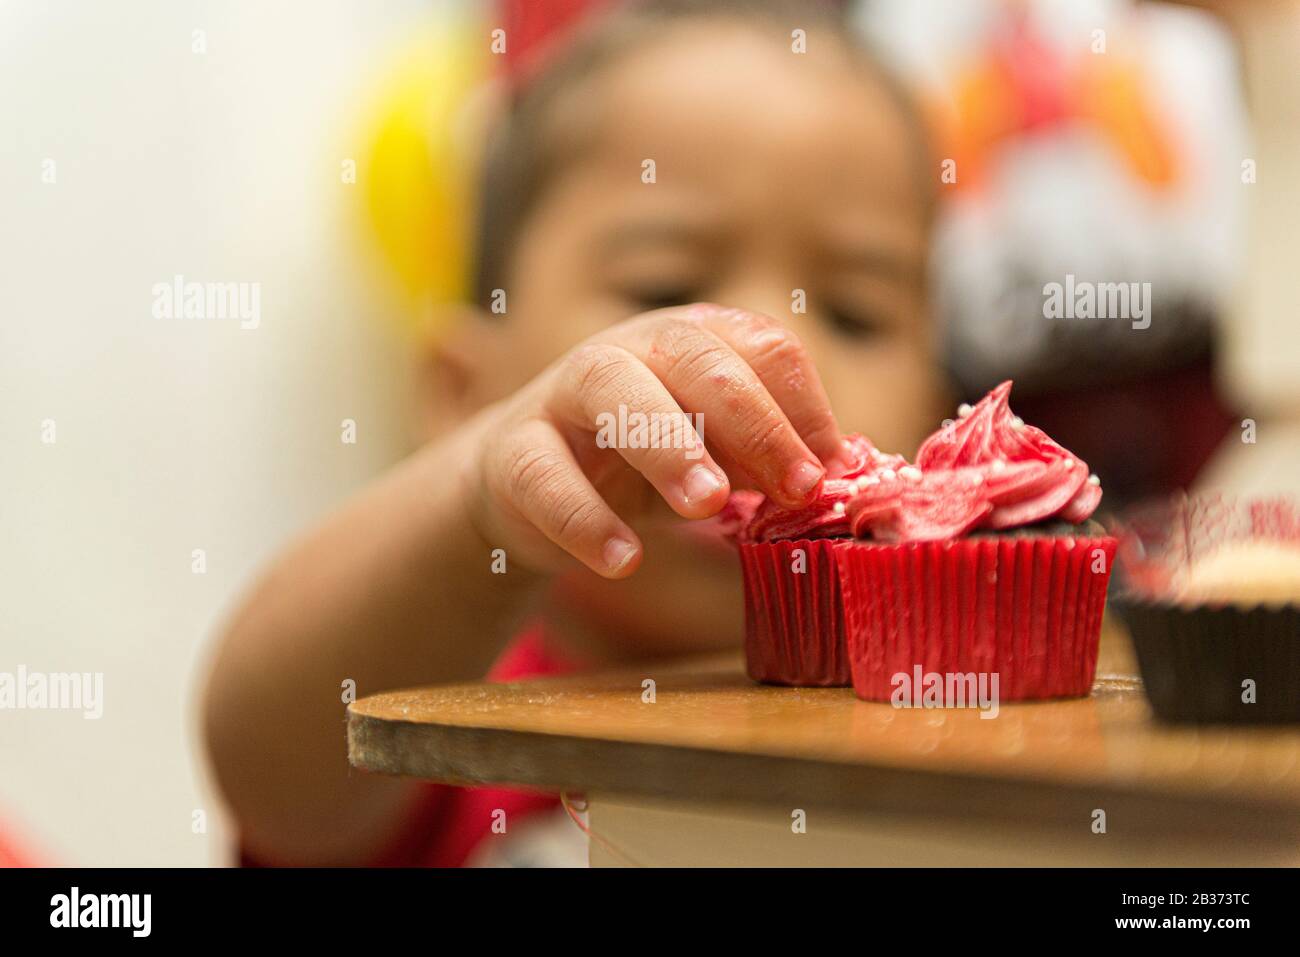 Blurred image of a boy picking up a creamy, red cupcake. Child enjoying sweet on children's birthday. Child smearing himself with a chocolate cupcake Stock Photo